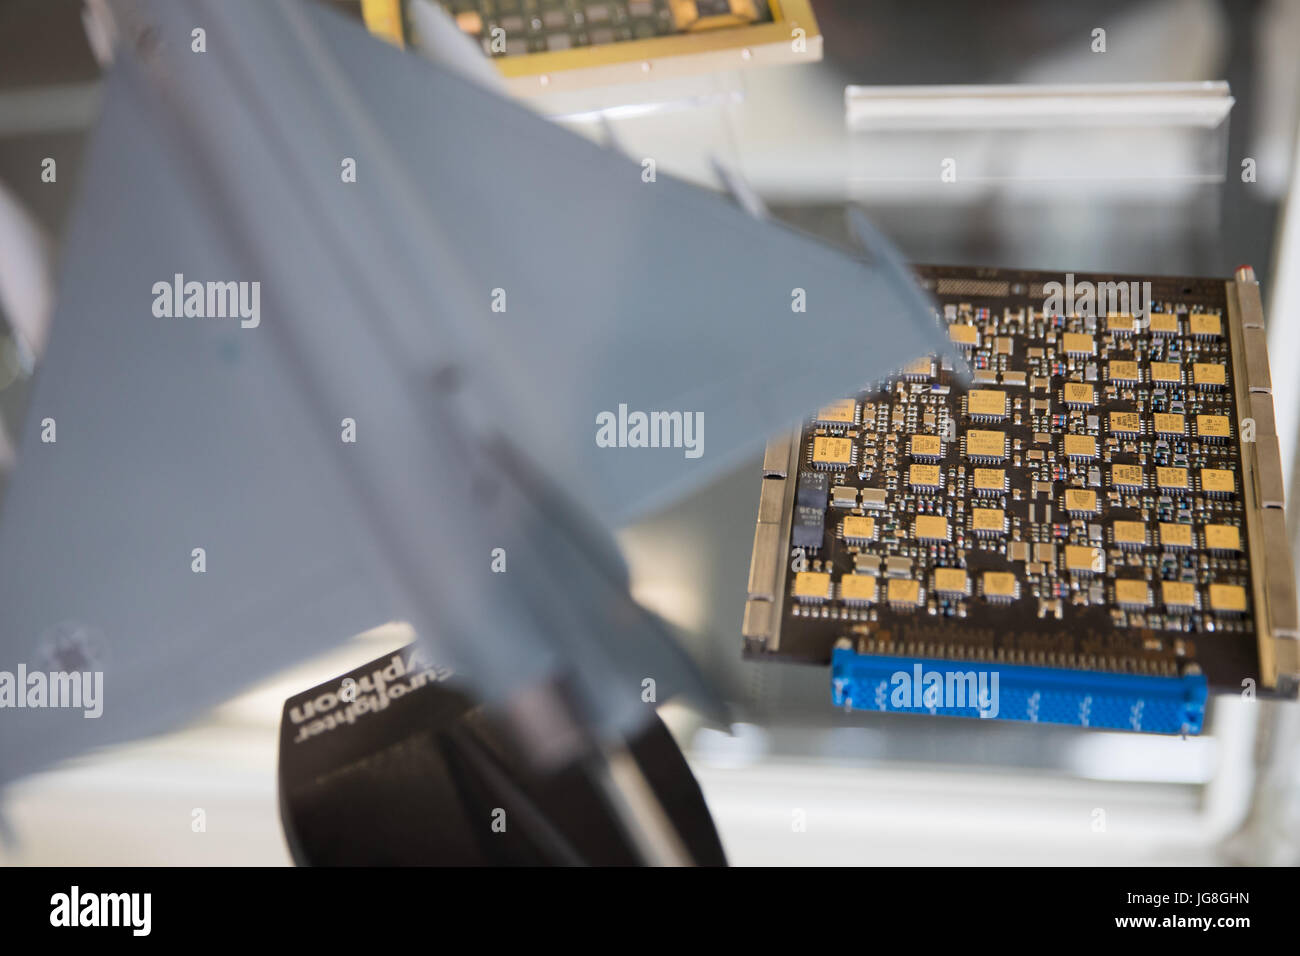 Nuremberg, Germany. 04th July, 2017. A circuit board of the industrial group and armaments company Diehl for the sensor signal processing of the engine control of the Eurofighter is pictured at the annual press conference of the company in Nuremberg, Germany, 04 July 2017. Photo: Daniel Karmann/dpa/Alamy Live News Stock Photo